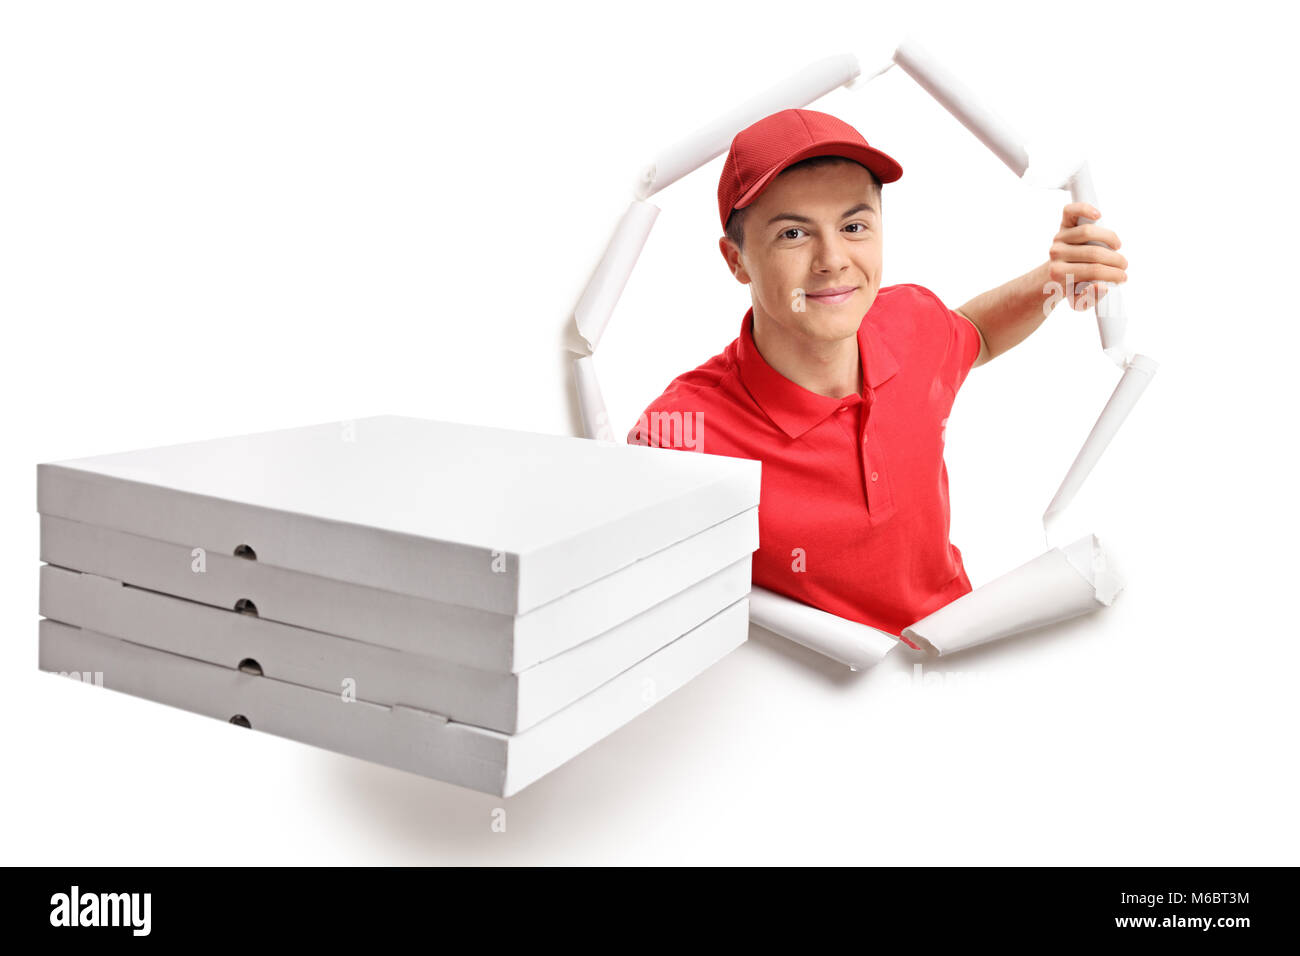 Teen delivery boy with pizza boxes breaking through paper Stock Photo